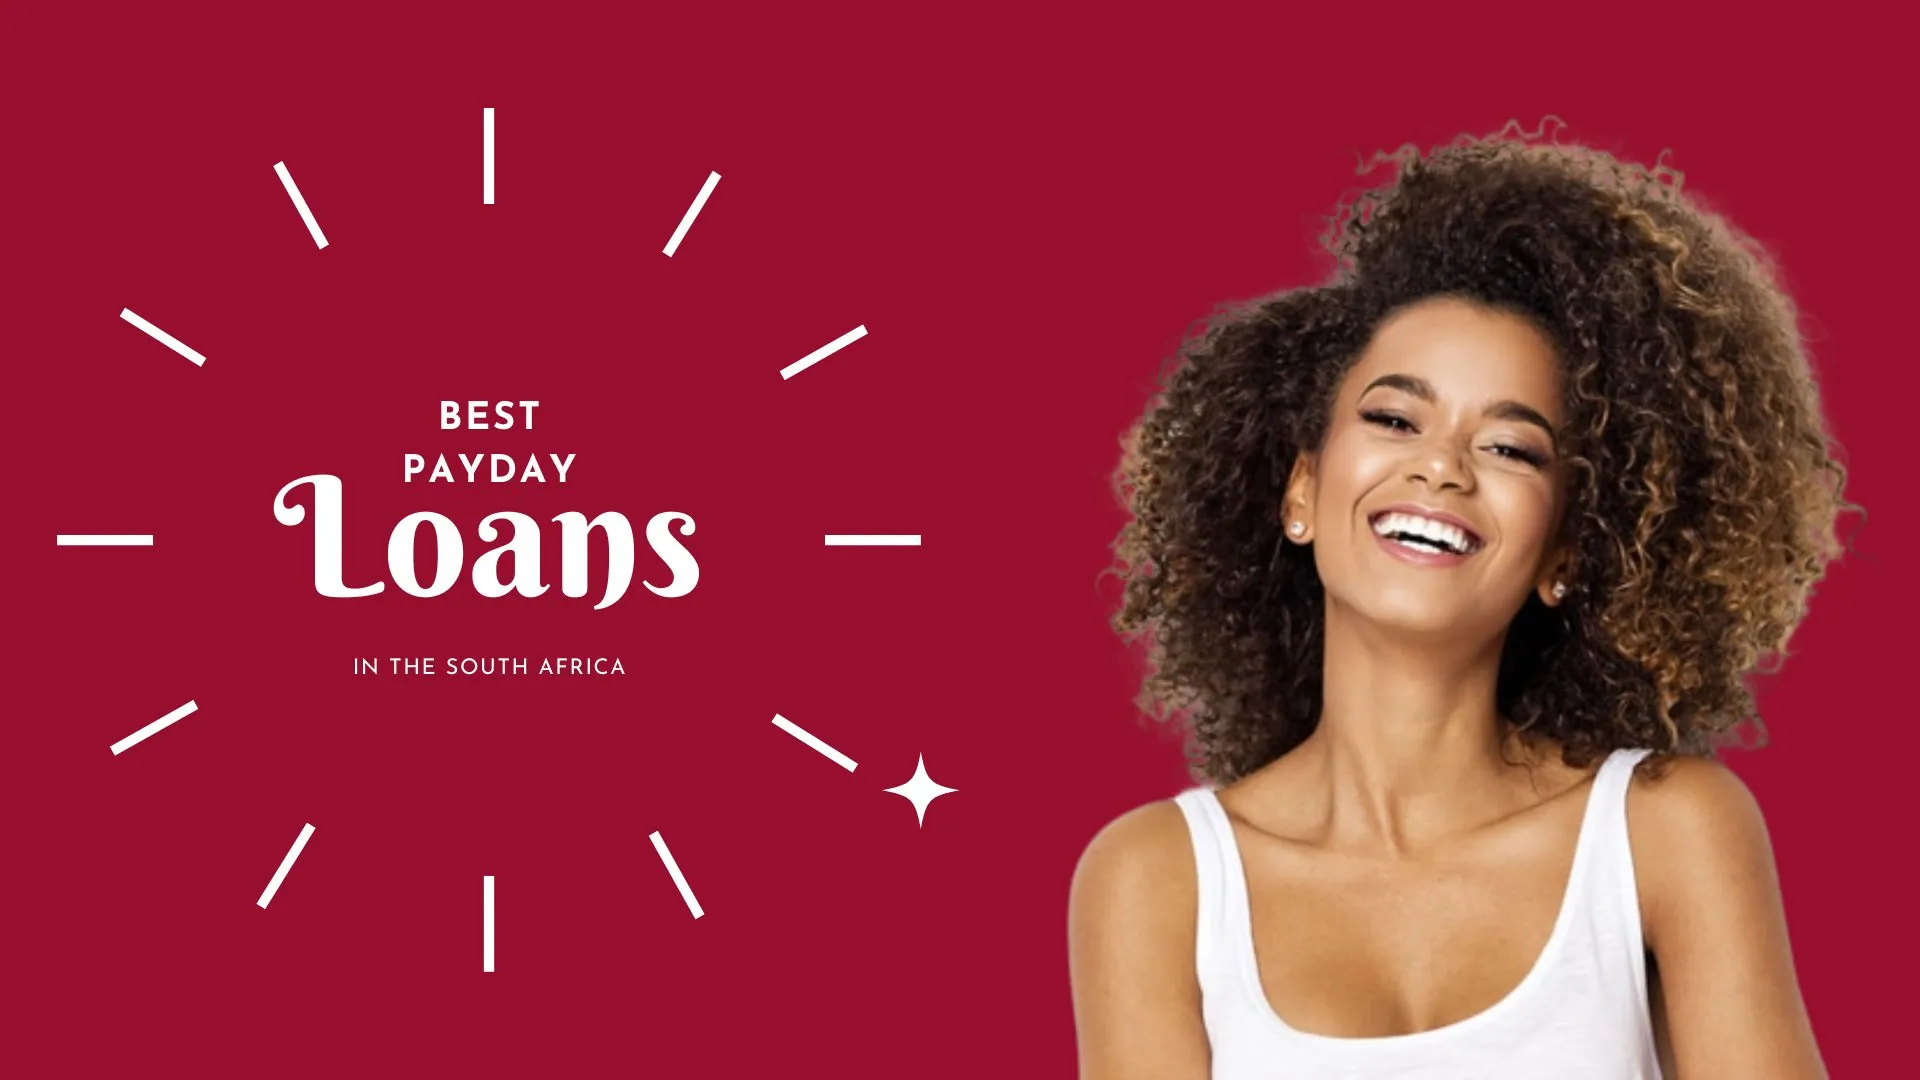 5 Payday Loans Without Credit Checks in South Africa